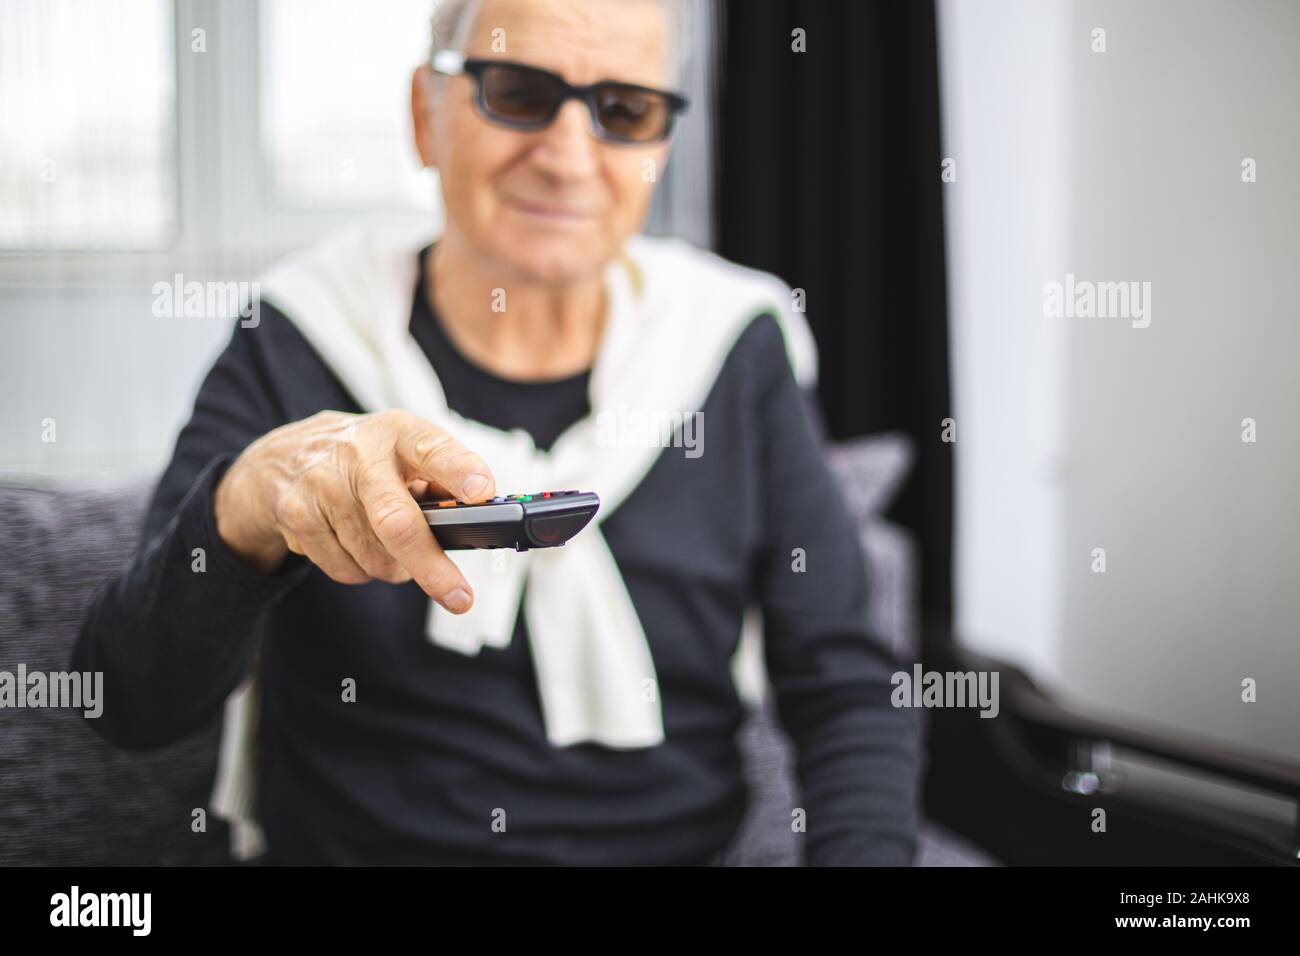 Senior man with 3D glasses and TV remote control in hand Stock Photo